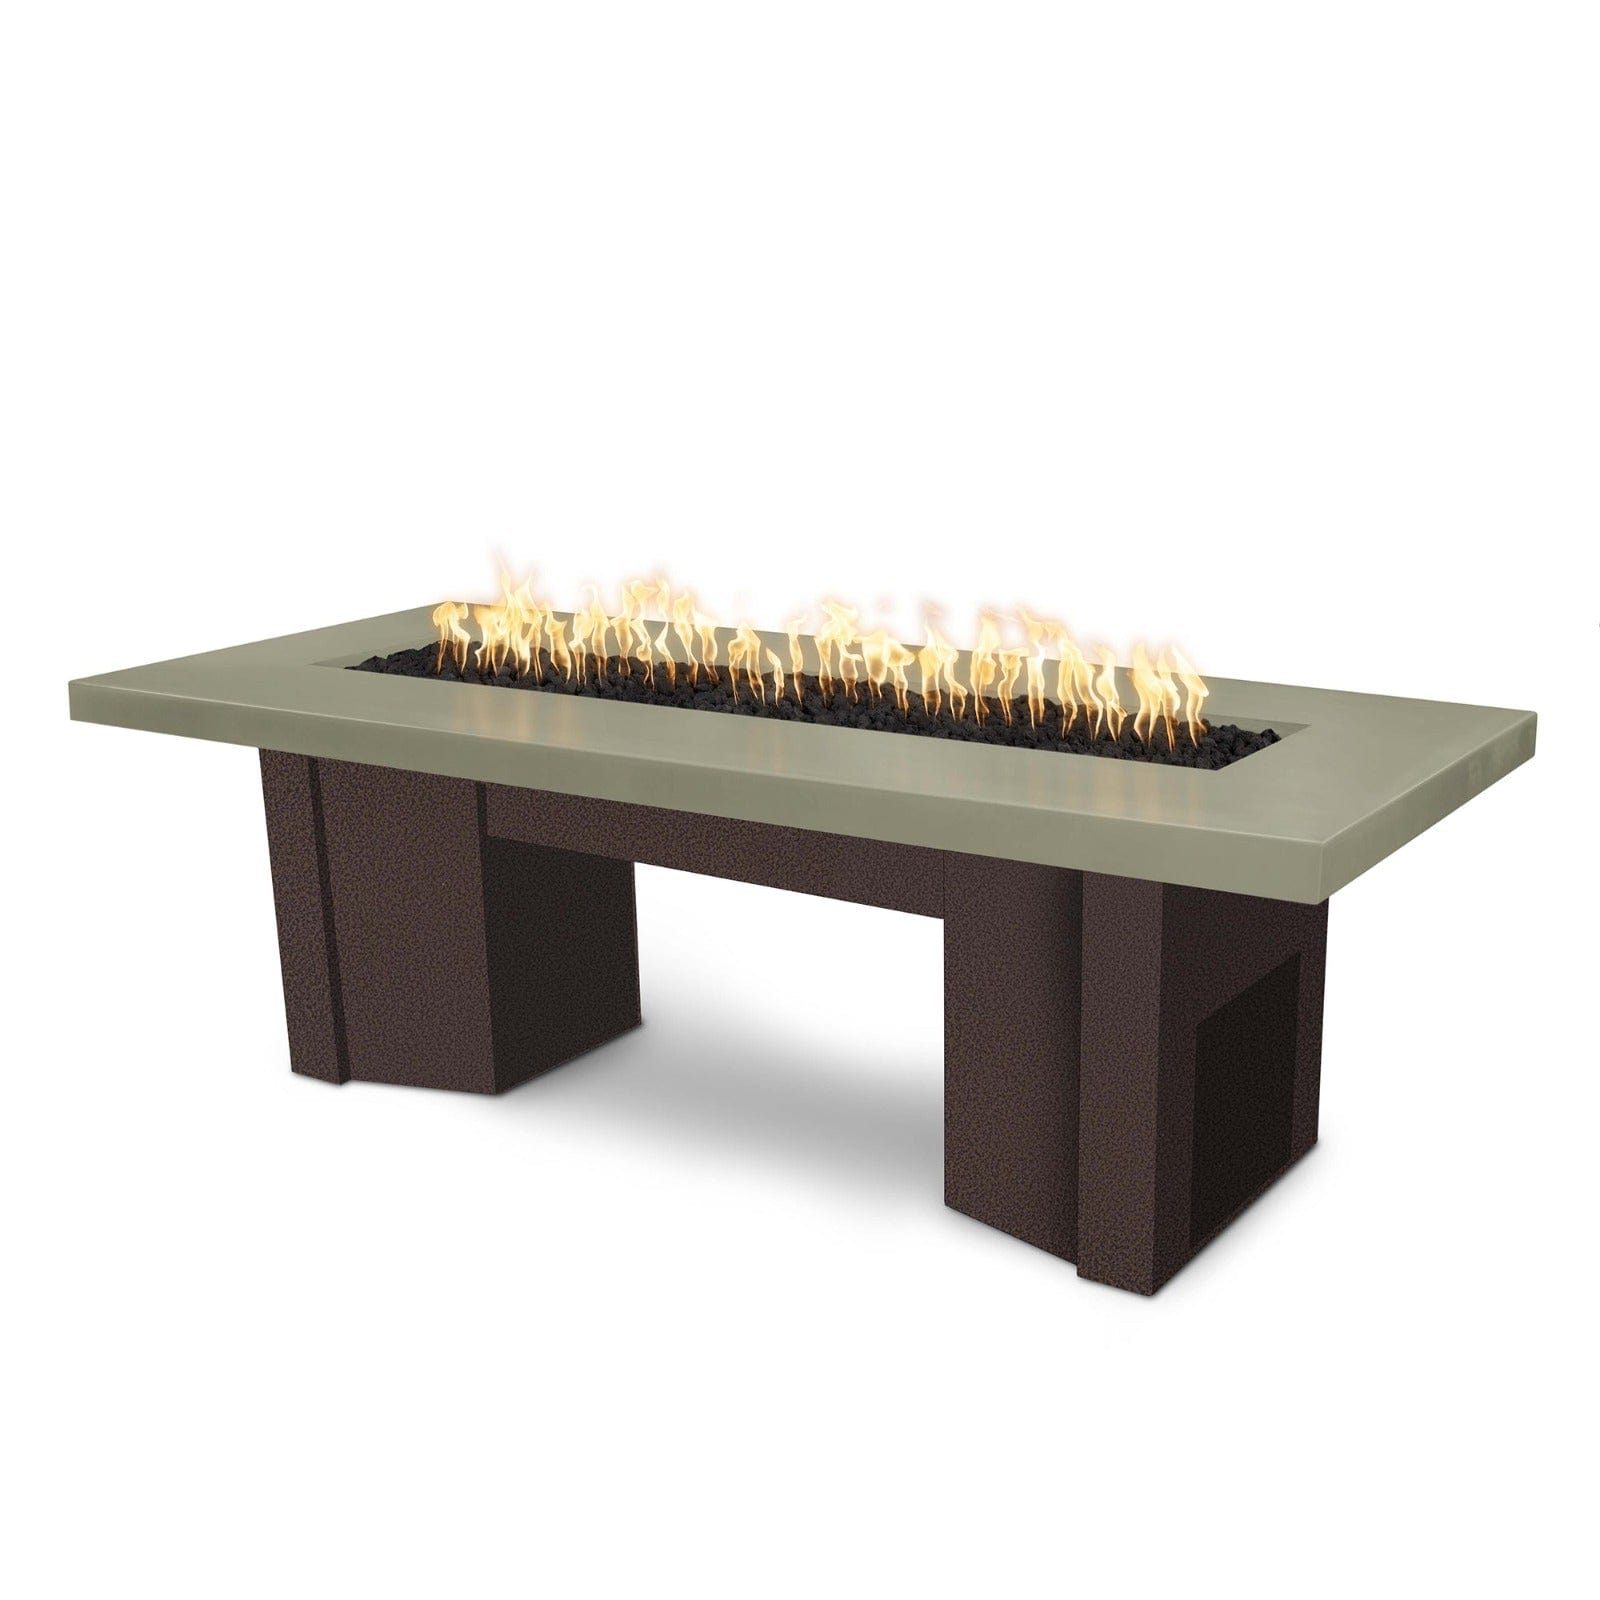 The Outdoor Plus Fire Features Ash (-ASH) / Copper Vein Powder Coated Steel (-CPV) The Outdoor Plus 78" Alameda Fire Table Smooth Concrete in Liquid Propane - 110V Plug & Play Electronic Ignition / OPT-ALMGFRC78EKIT-LP